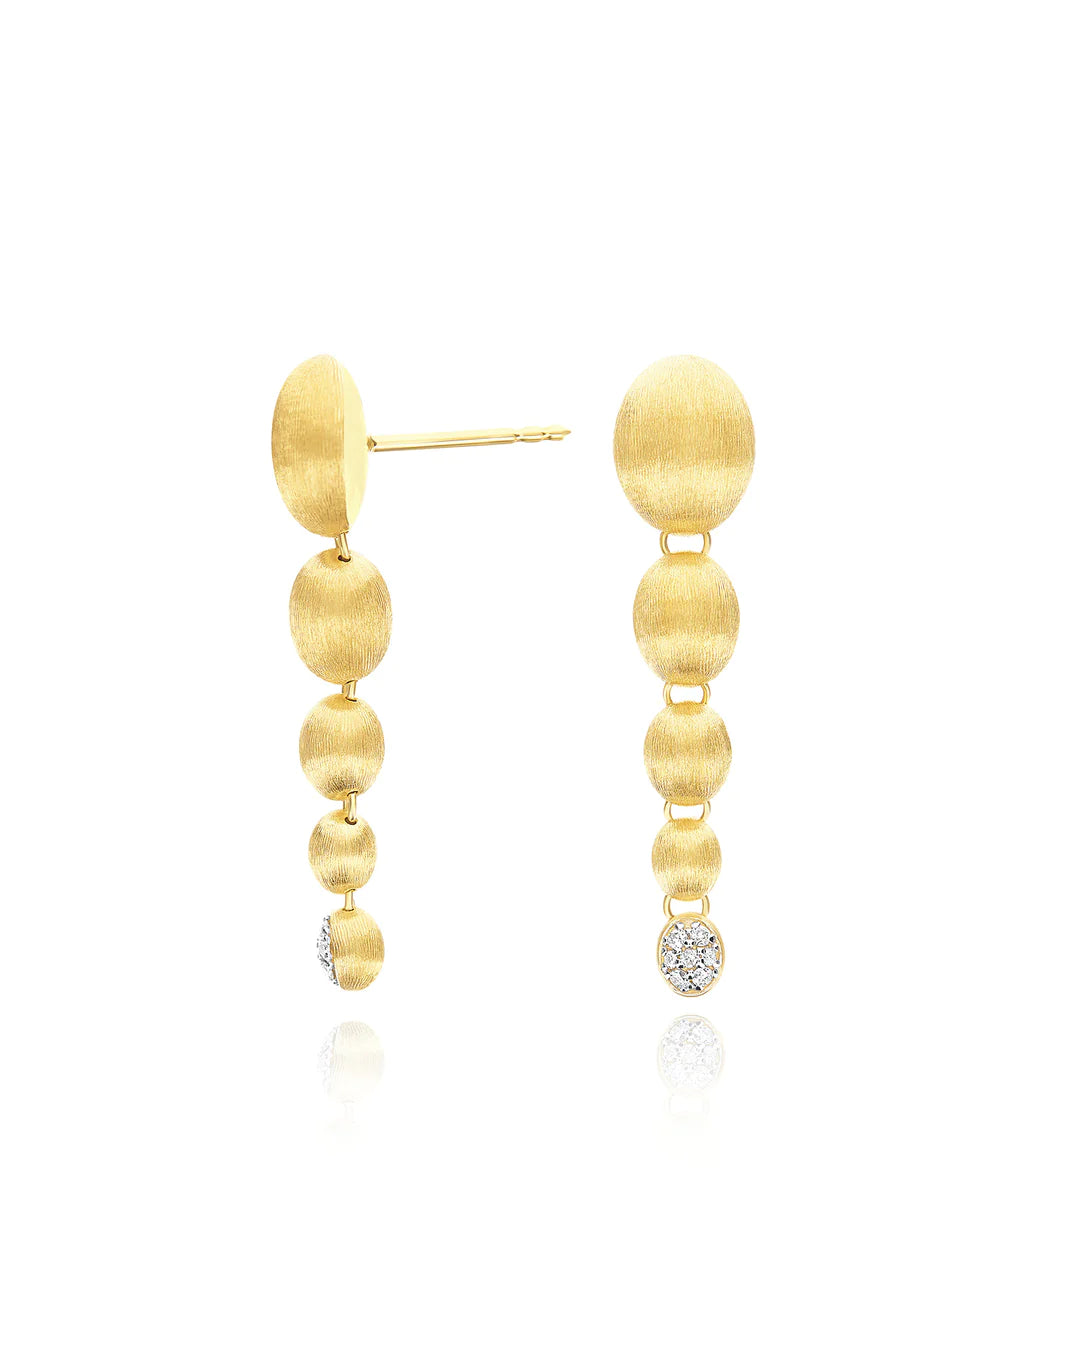 "NUVOLETTE" GOLD AND DIAMONDS CHARMING DROP EARRINGS